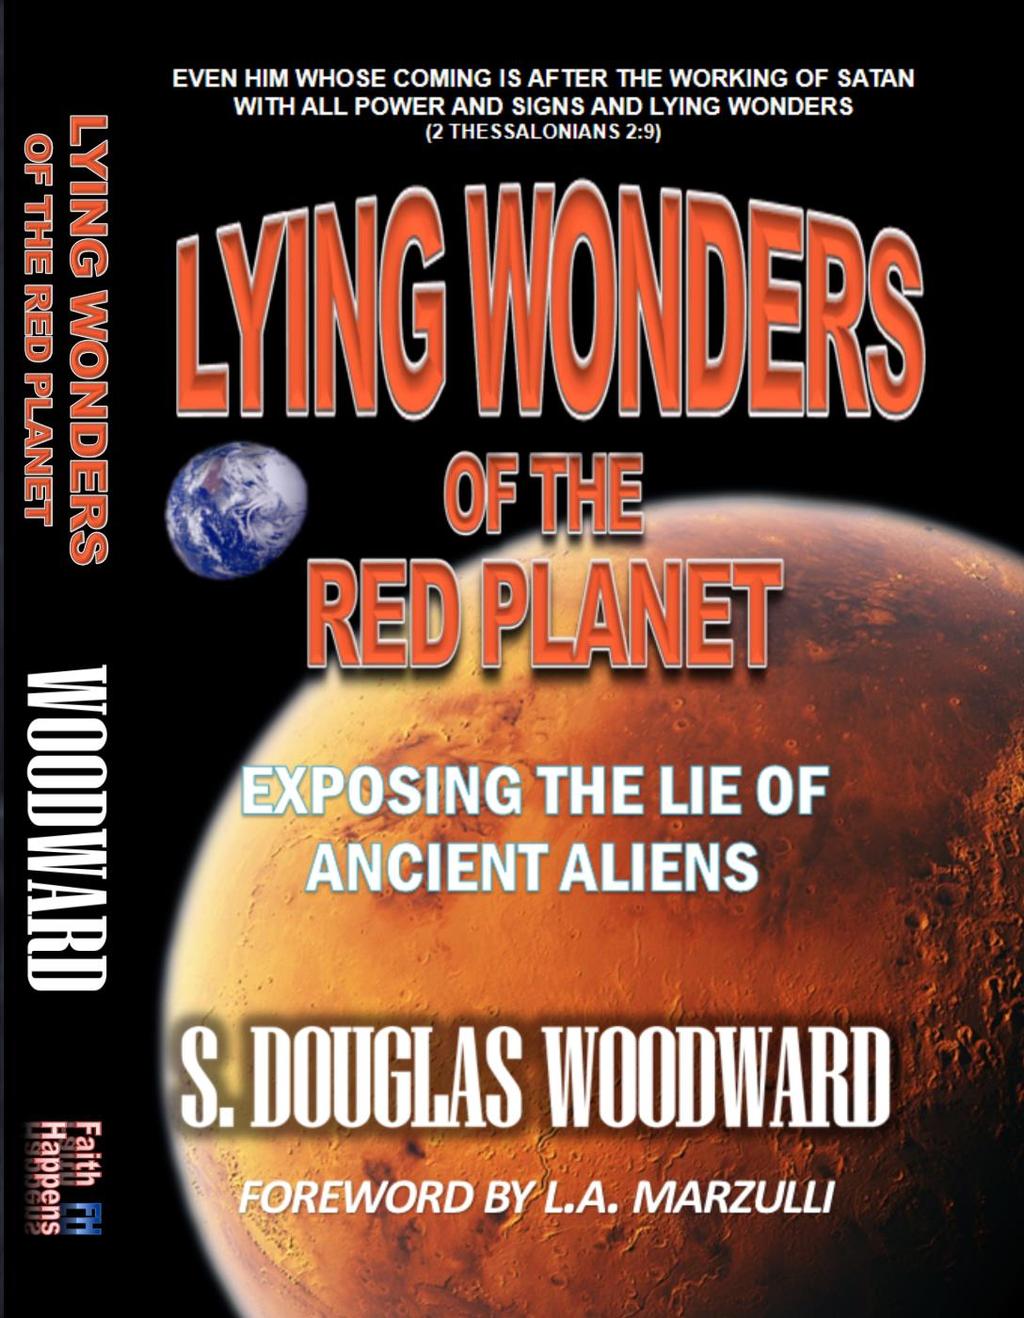 S. Douglas Woodward: Author of five previous books plus coauthored THE FINAL BABYLON LYING WONDERS OF THE RED PLANET Exposing the Lie of Ancient Aliens